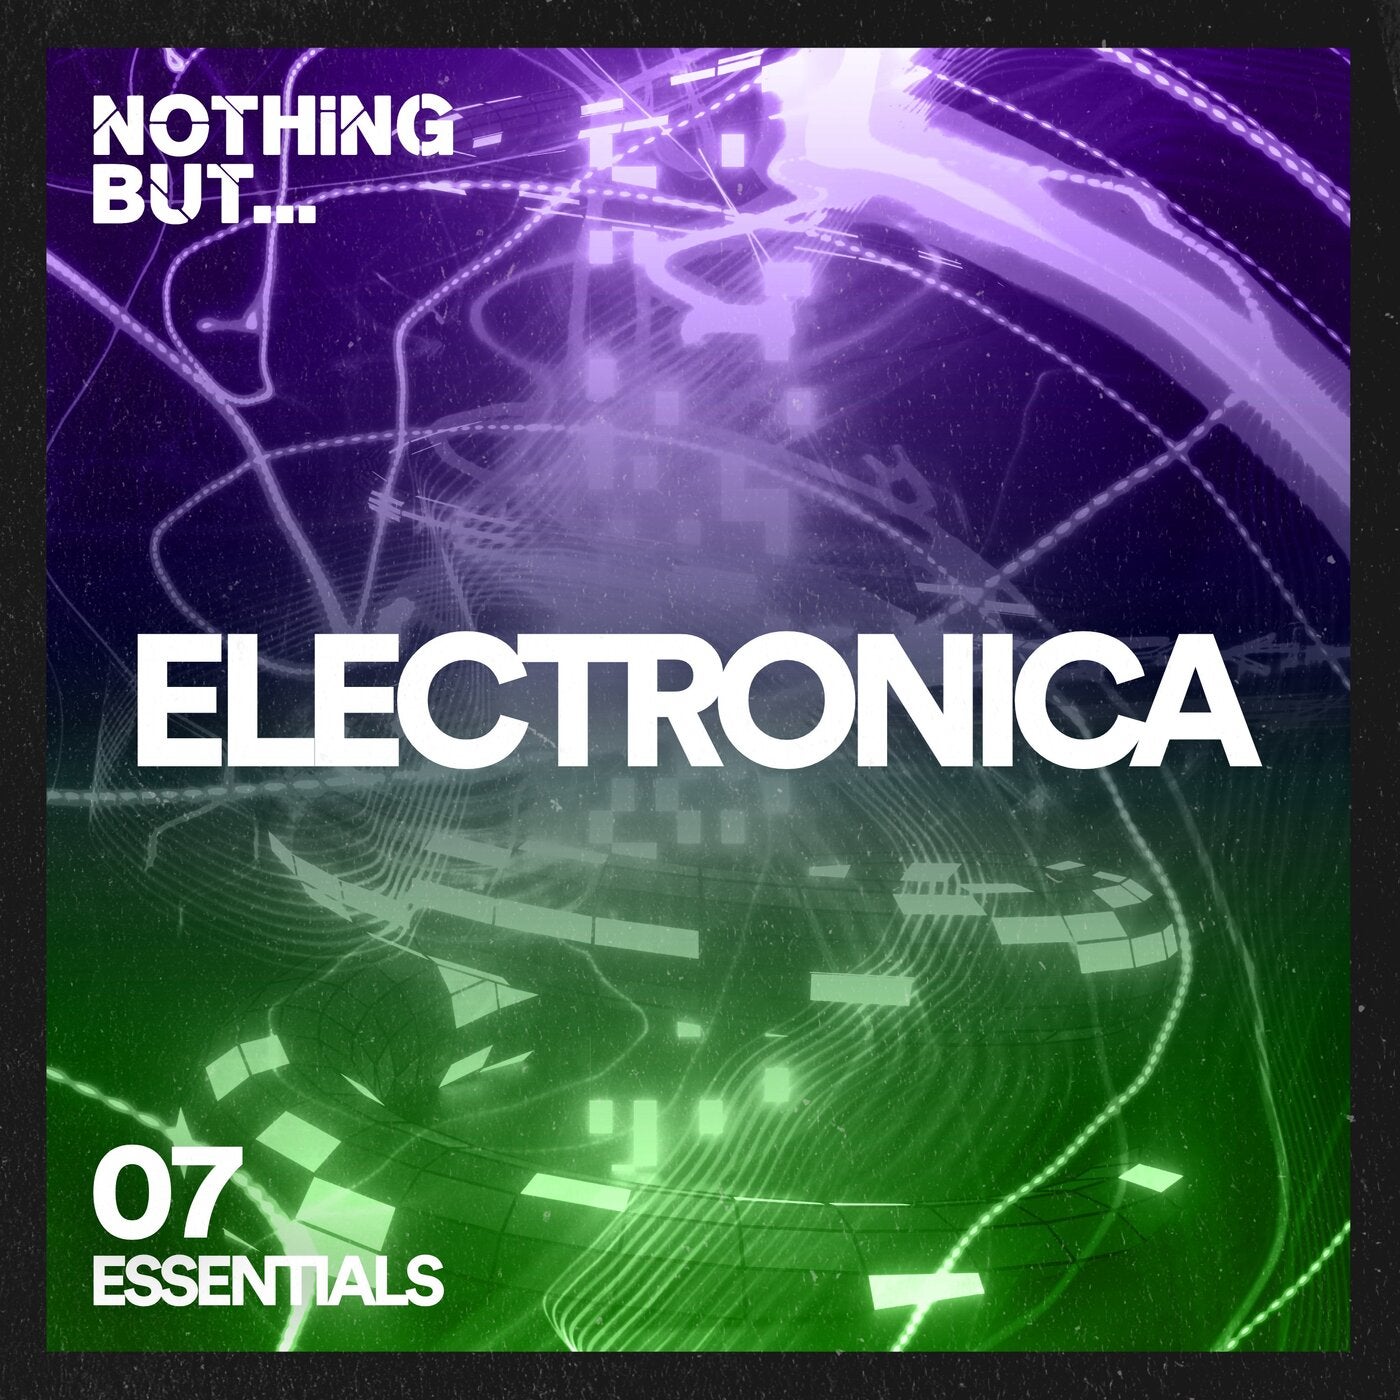 Nothing But... Electronica Essentials, Vol. 07